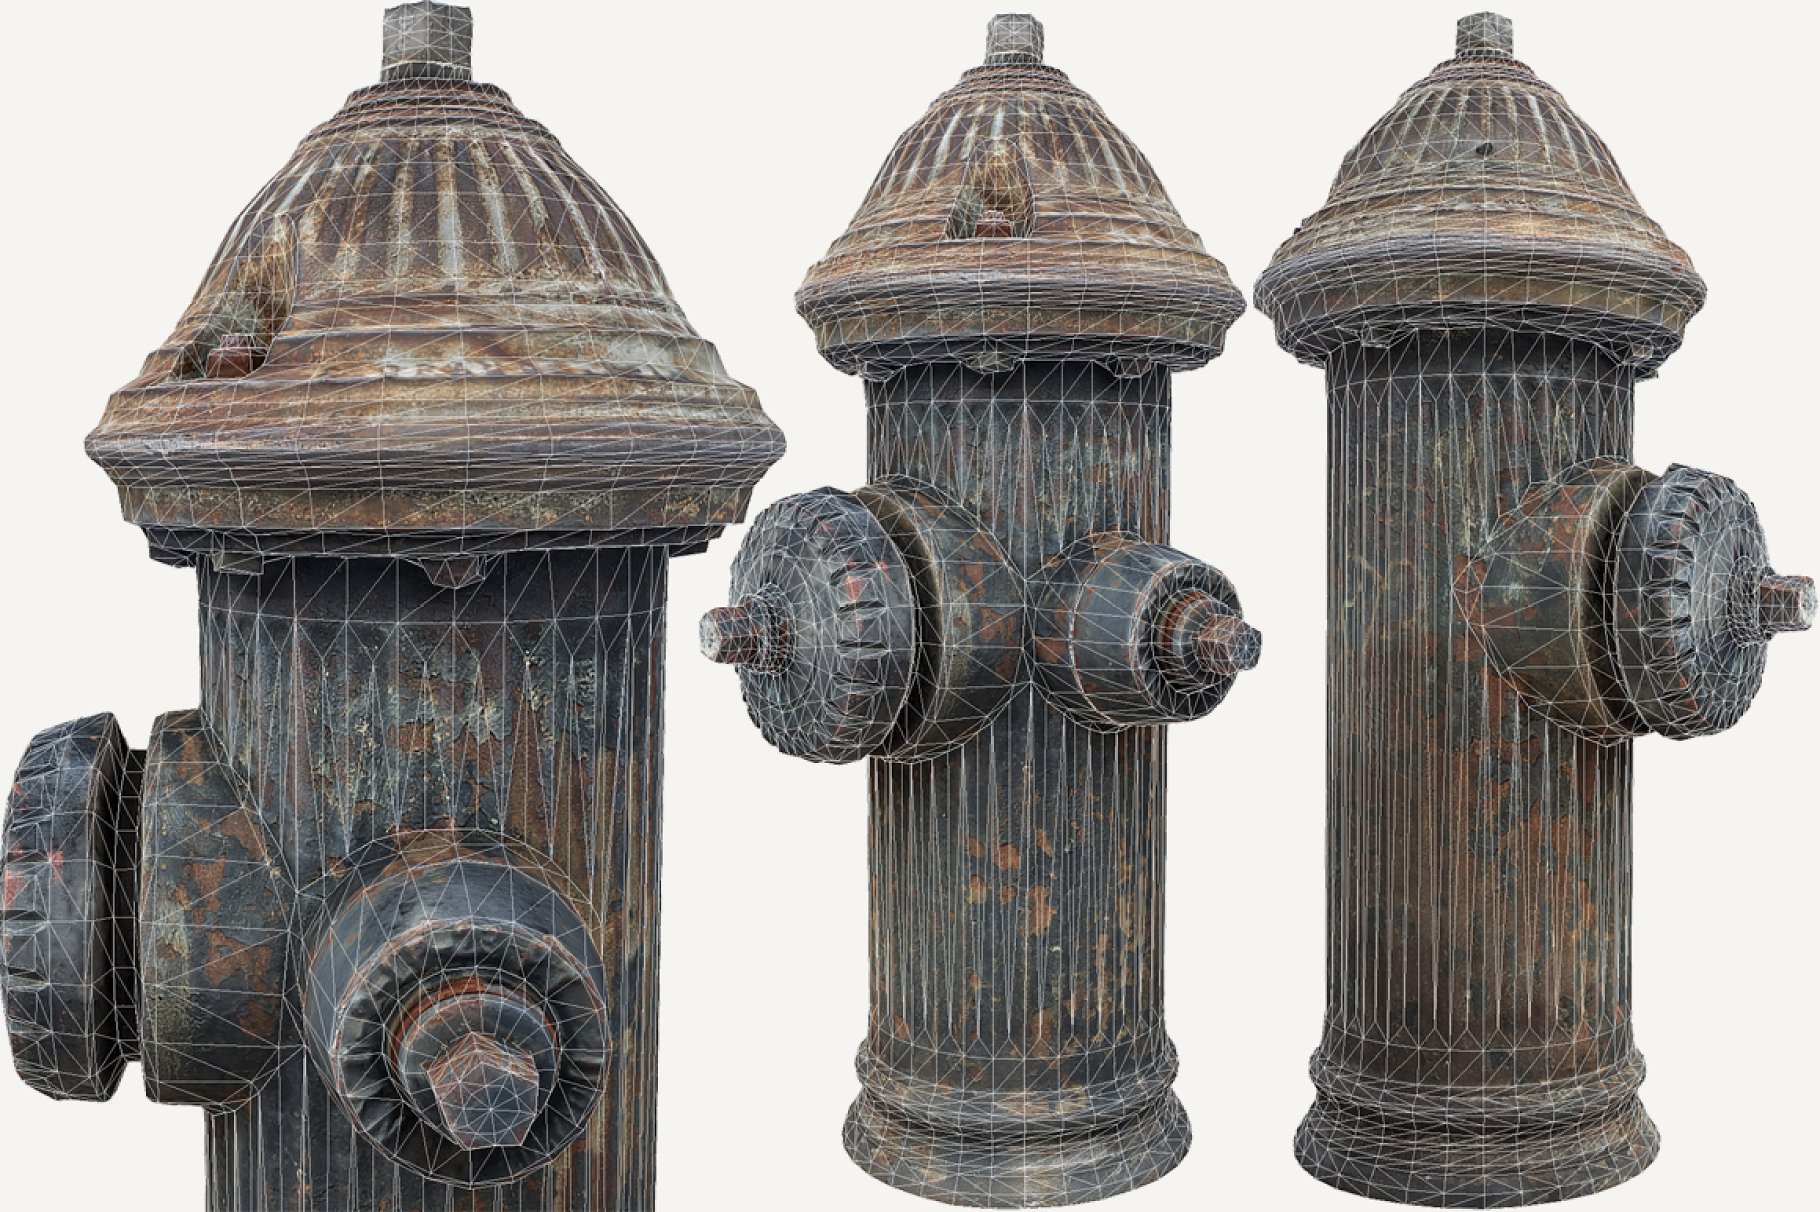 3 different graphic models of fire hydrant.